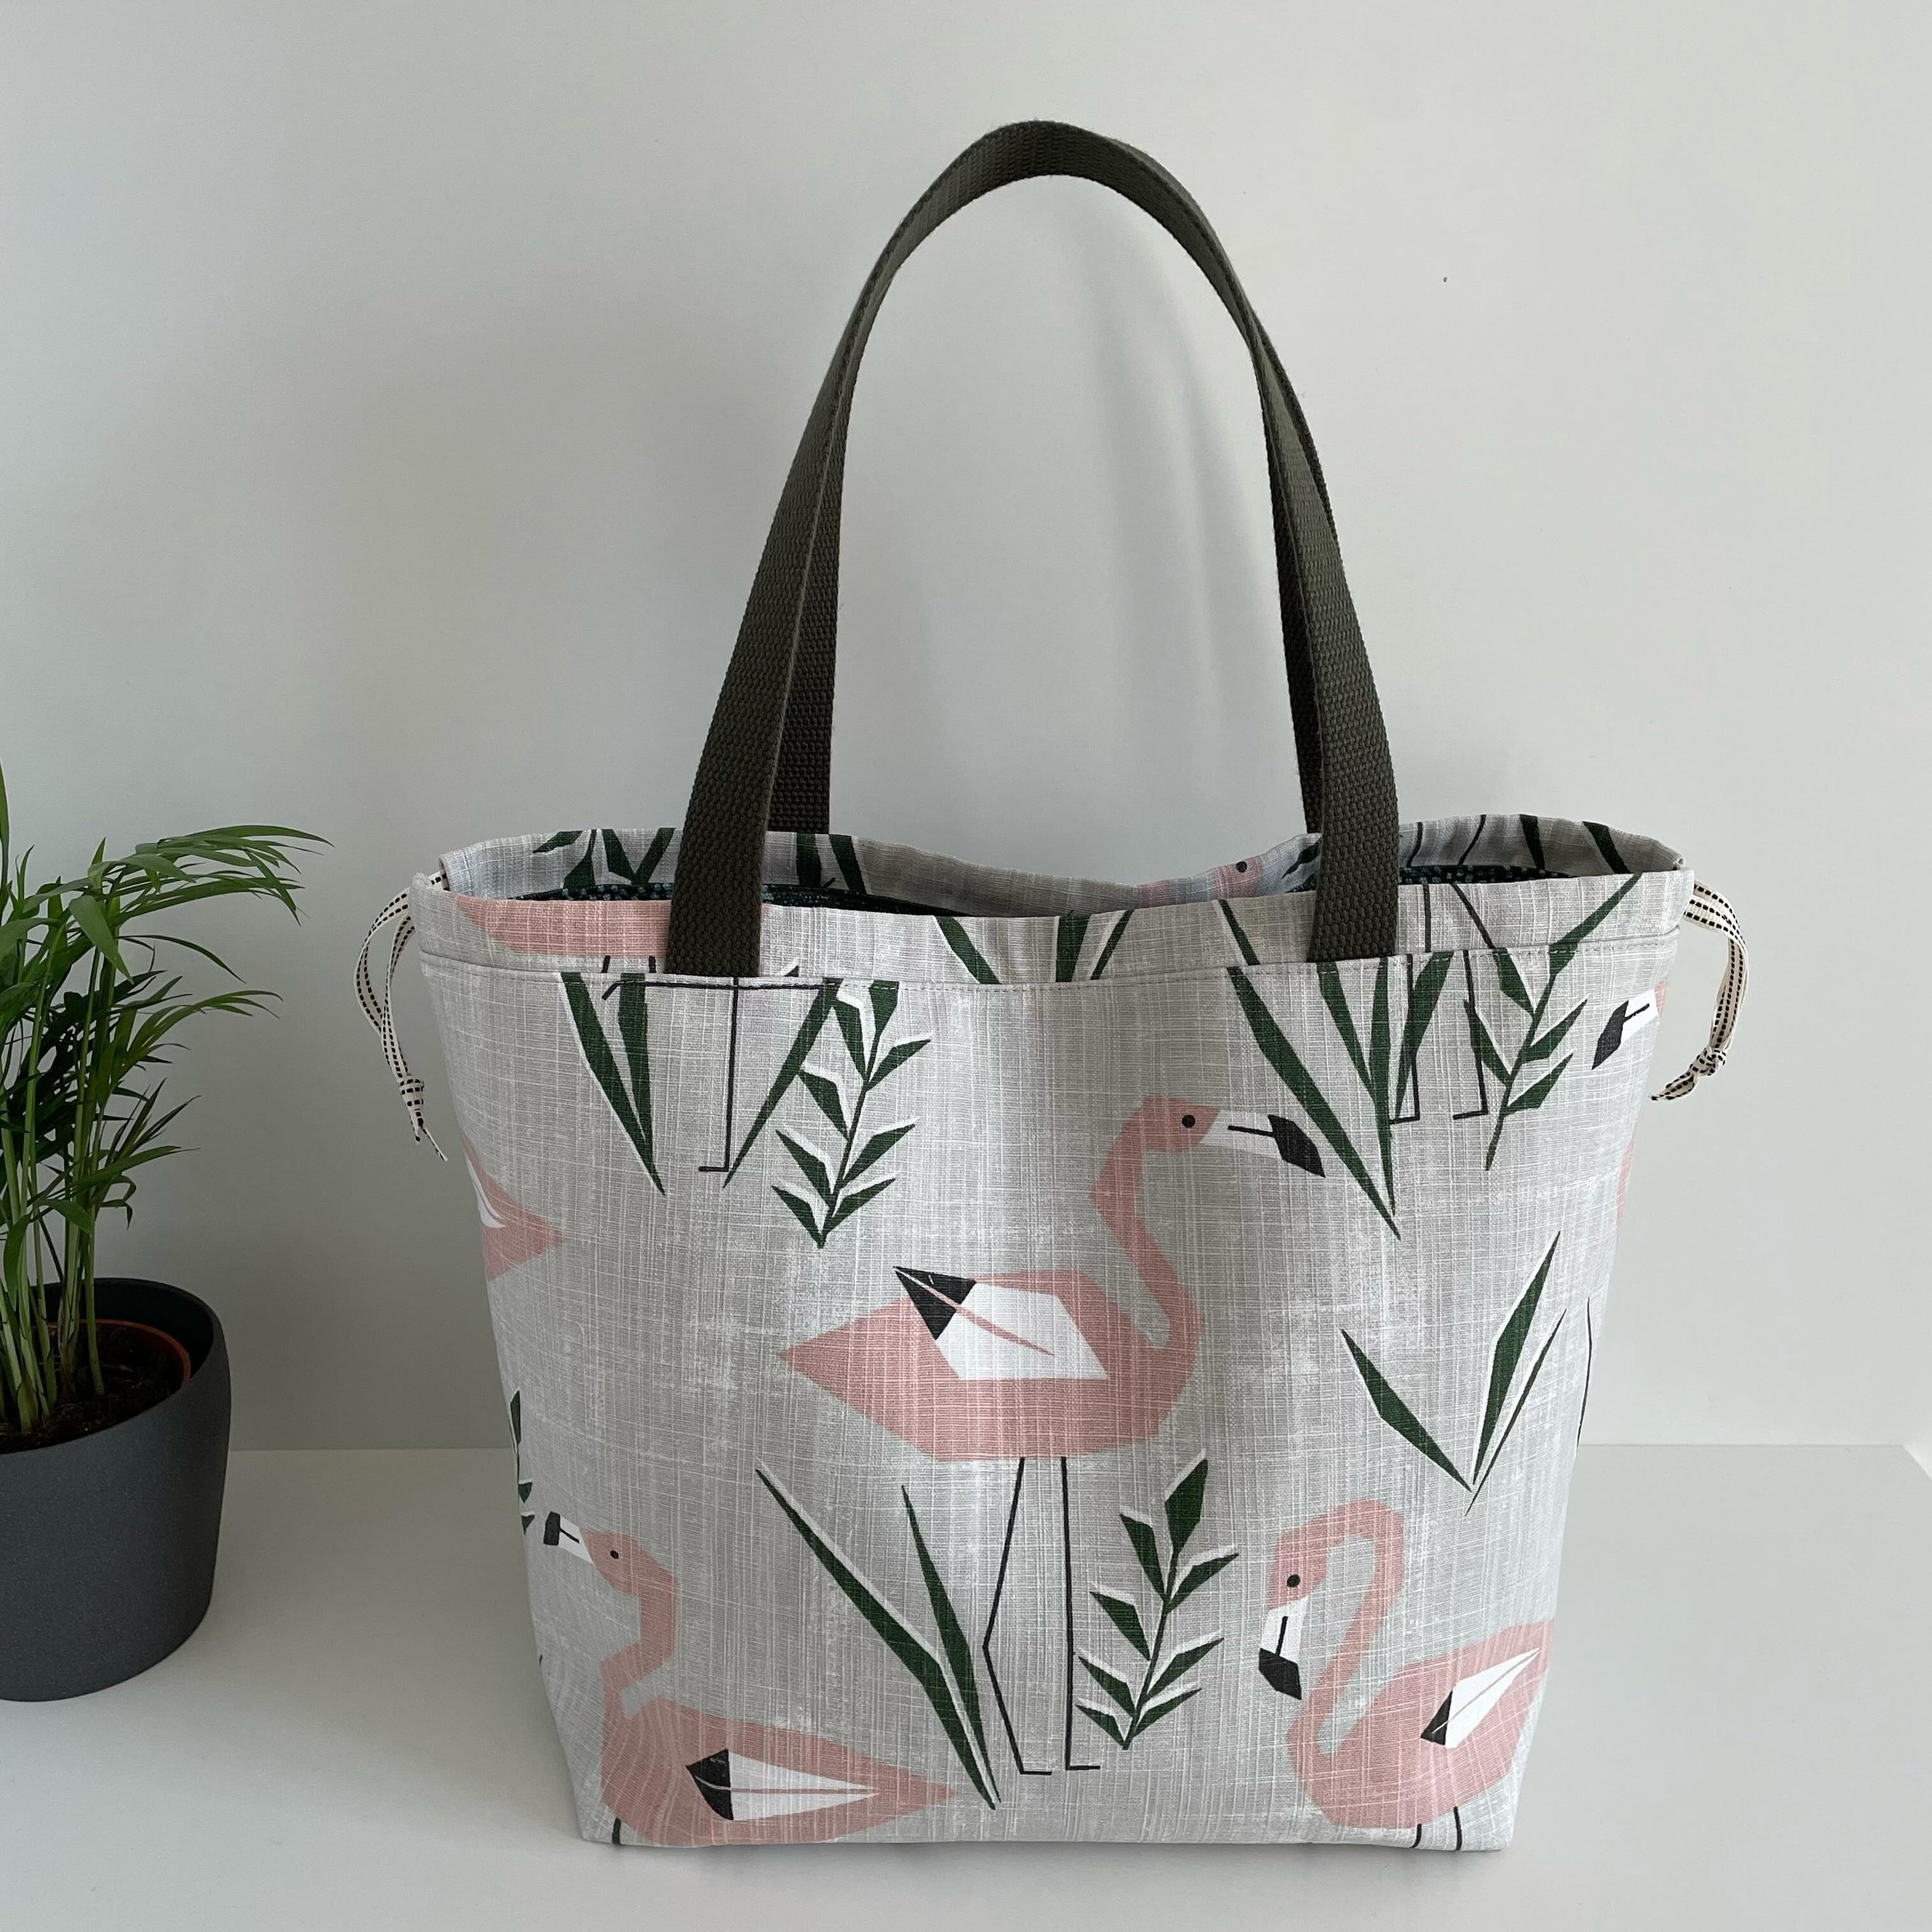 I think this gorgeous canvas makes for a perfect summer tote. I used my Denver Tote pattern and couldn&rsquo;t be happier with the finished bag.

Find this pattern (in two sizes) in my shop. Link is in my profile.

Wishing you all a happy and creativ